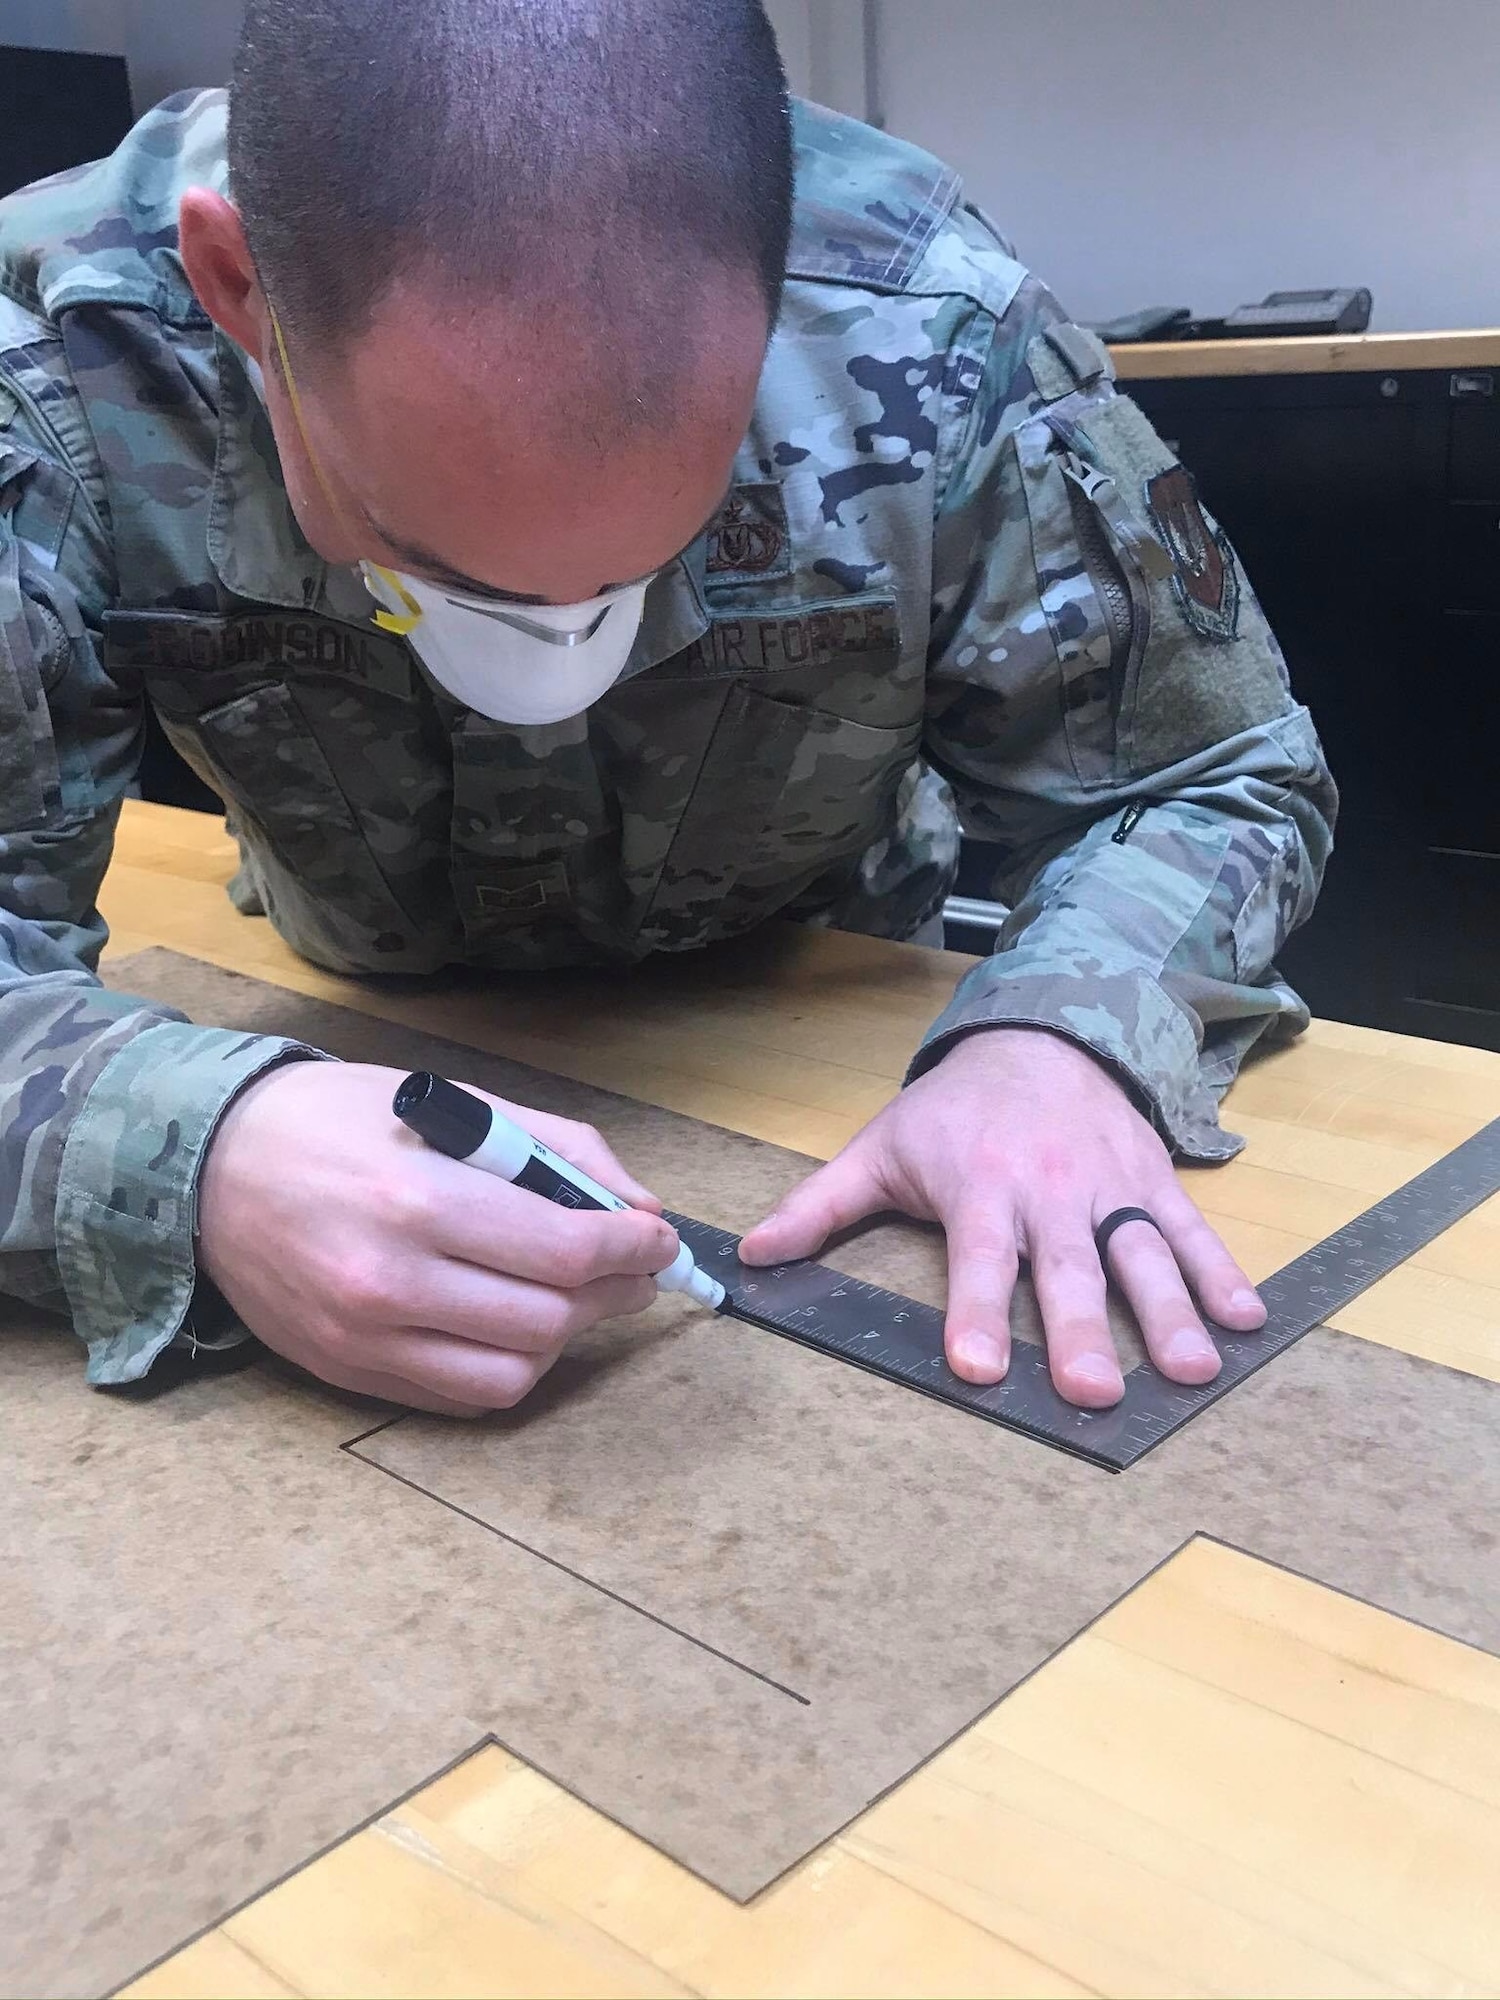 U.S. Air Force Tech Sgt. Kevin Robinson, 52nd Operations Support Squadron NCOIC of aircrew flight equipment quality assurance, makes an outline for face masks at Spangdahlem Air Base, Germany, April 13, 2020. Robinson says he has the skills, tools, and ability to make masks, so he wants to help out the base and local community as much as he can. Public health protection is the 52nd Fighter Wing’s top priority, and the wing continues to ensure that personnel and community members have the most up-to-date information on appropriate measures to prevent potential spread of COVID-19. (52nd Operations Support Squadron courtesy photo)